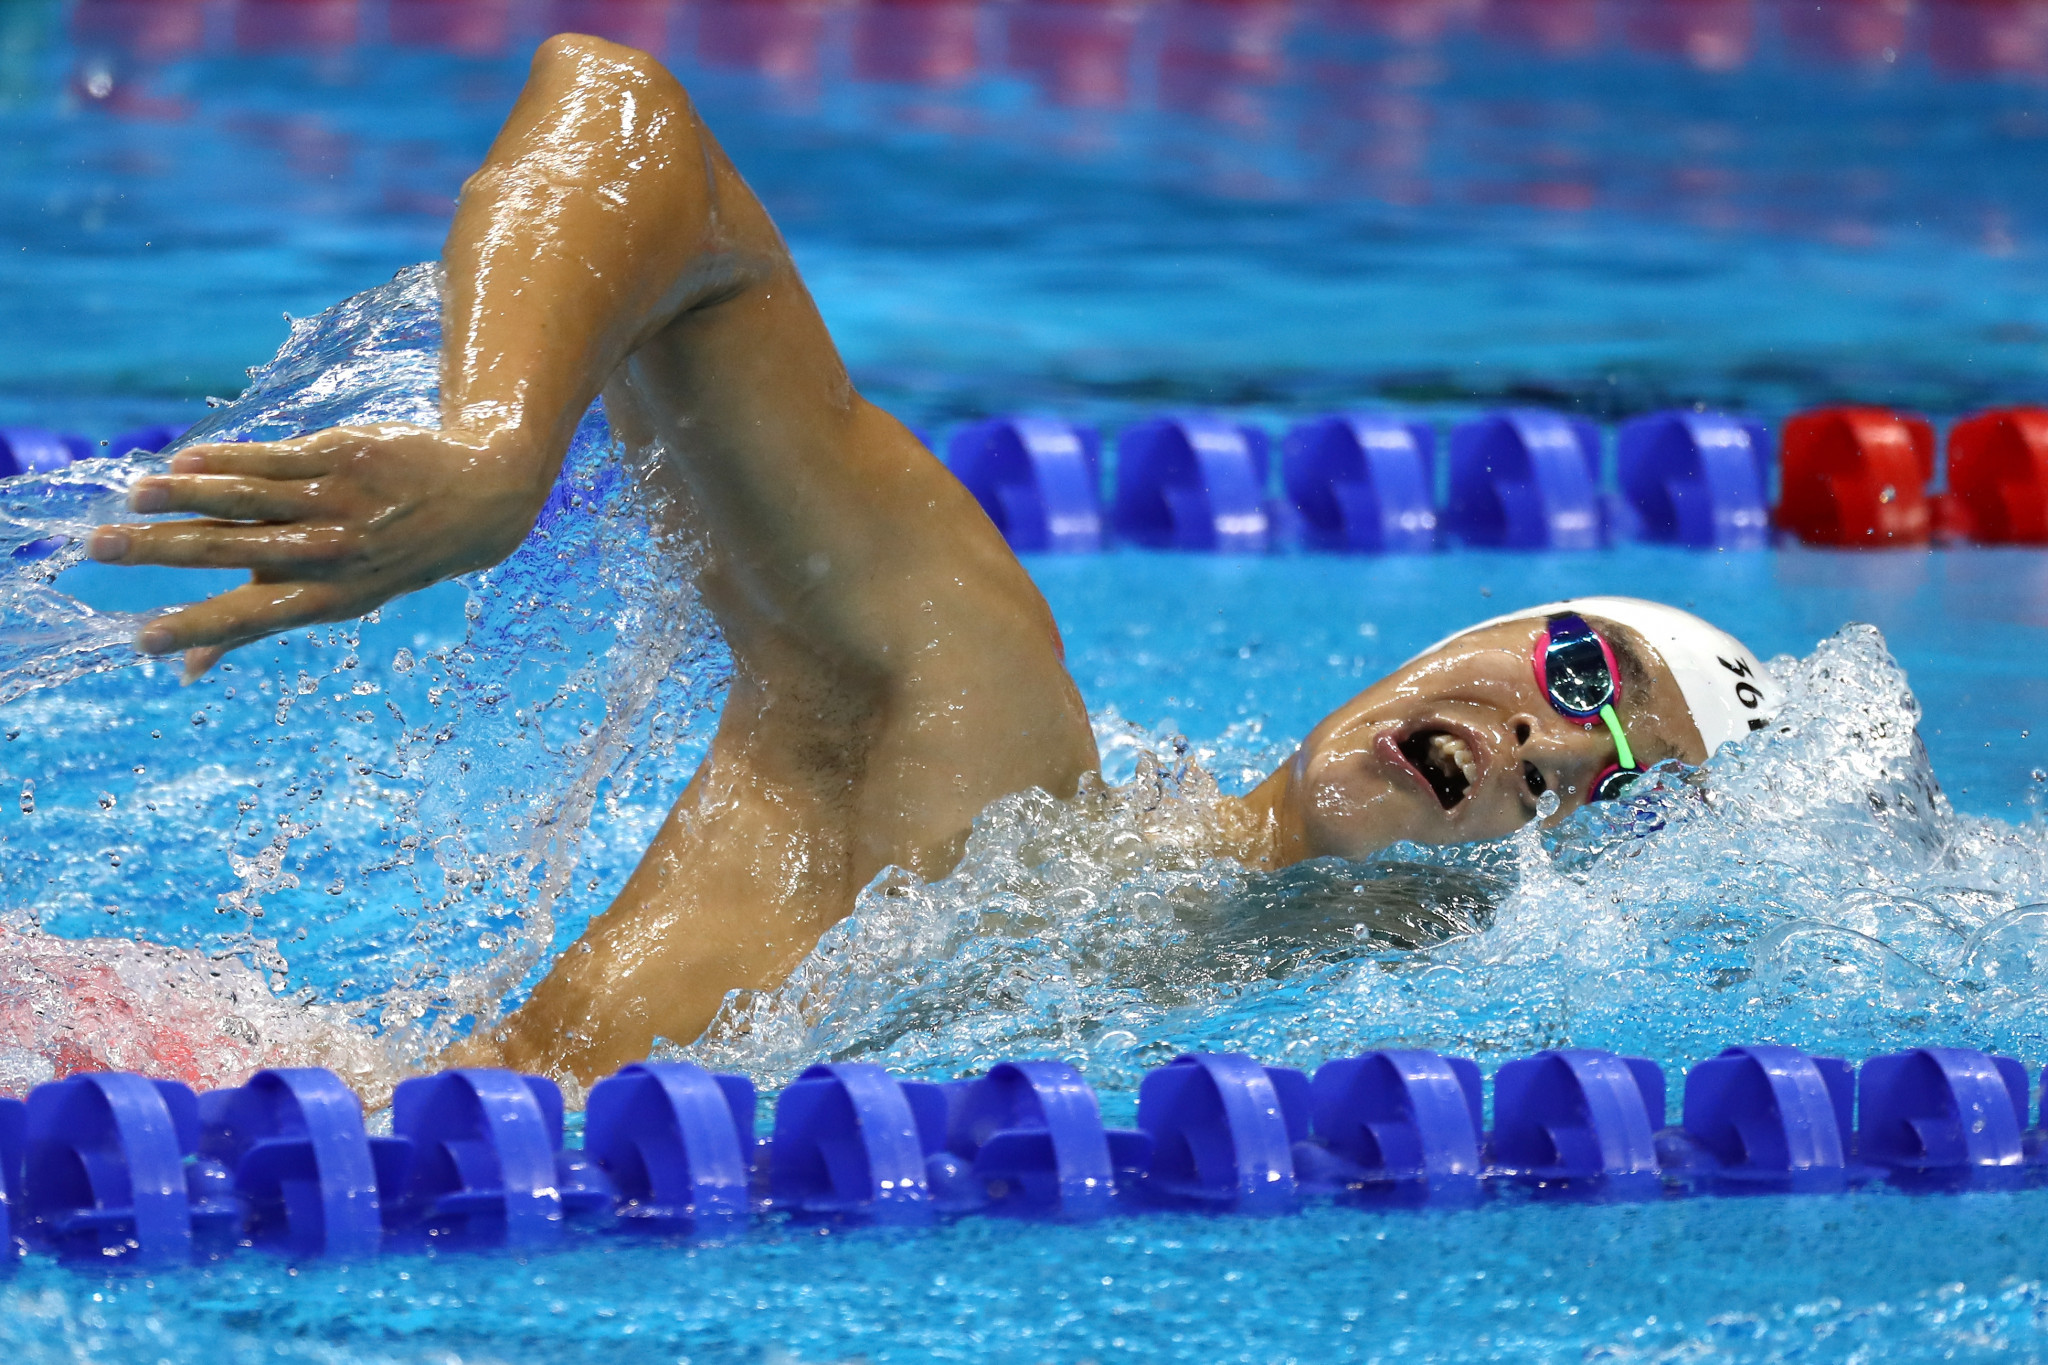 China's Sun Yang has been welcomed back into the sport after serving a secretive three-month doping ban ©Getty Images